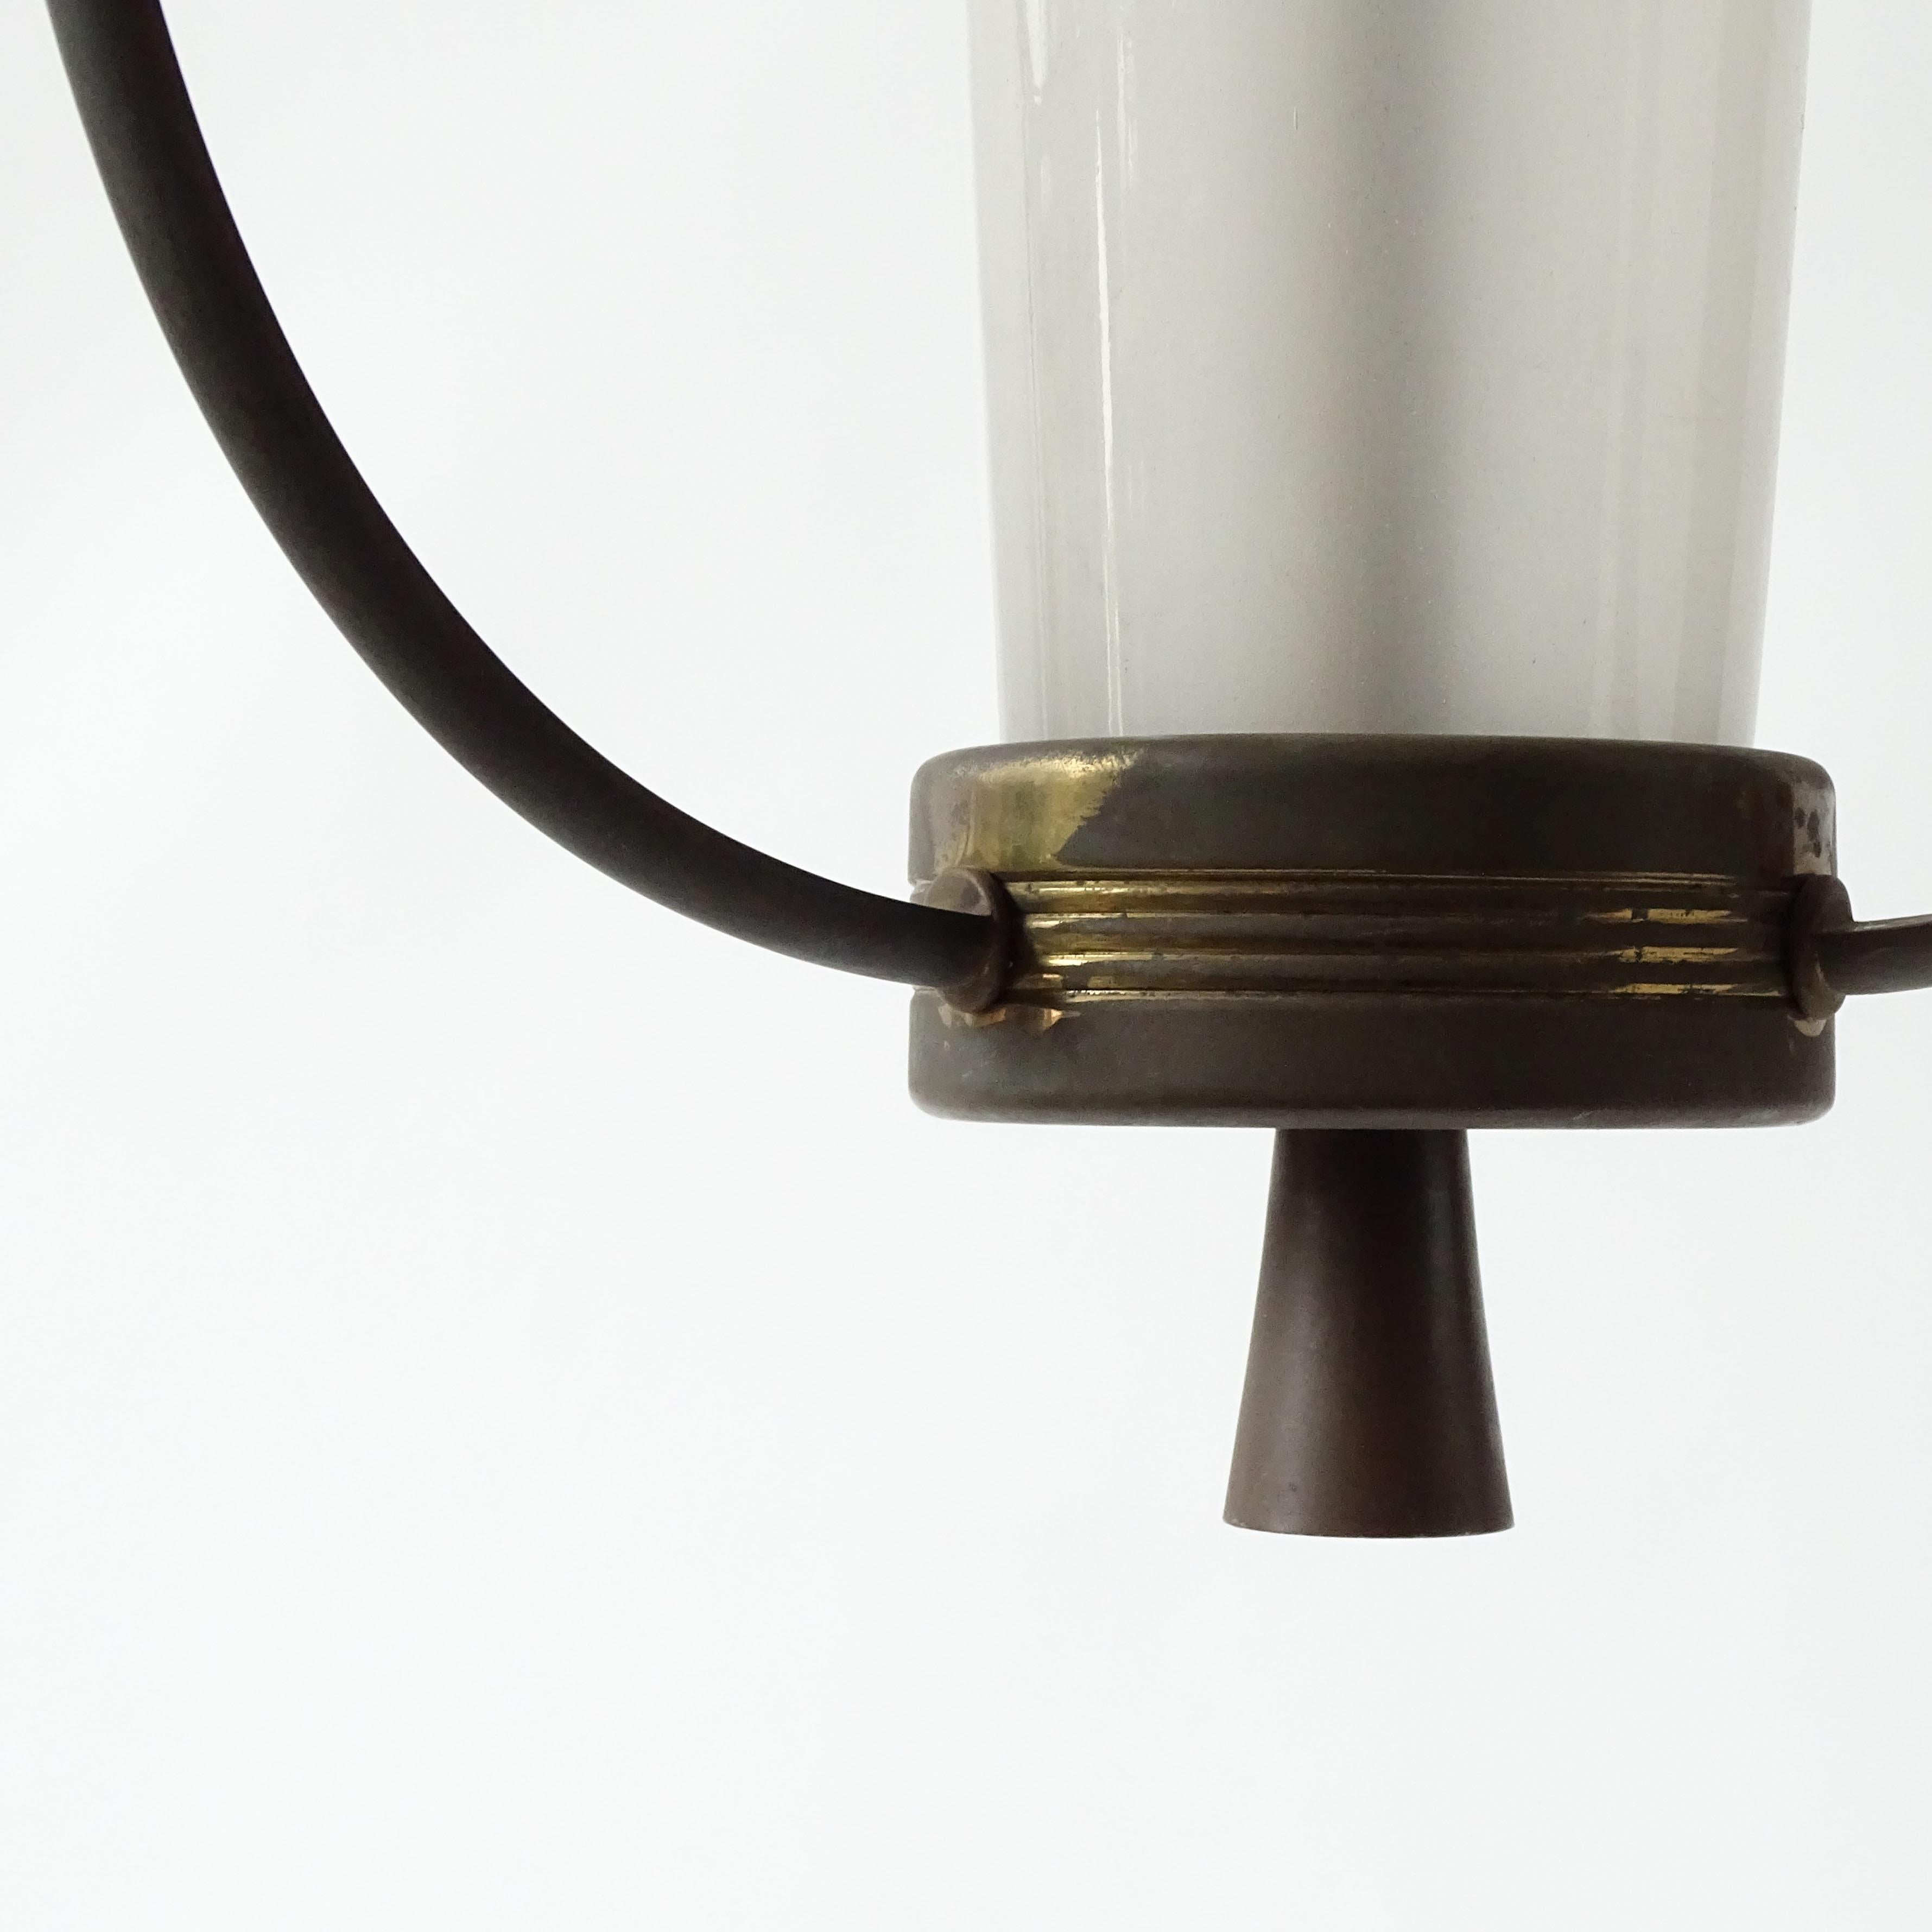 Monumental Guglielmo Ulrich Ceiling Lamp in Brass and Glass, Italy 1940s For Sale 3